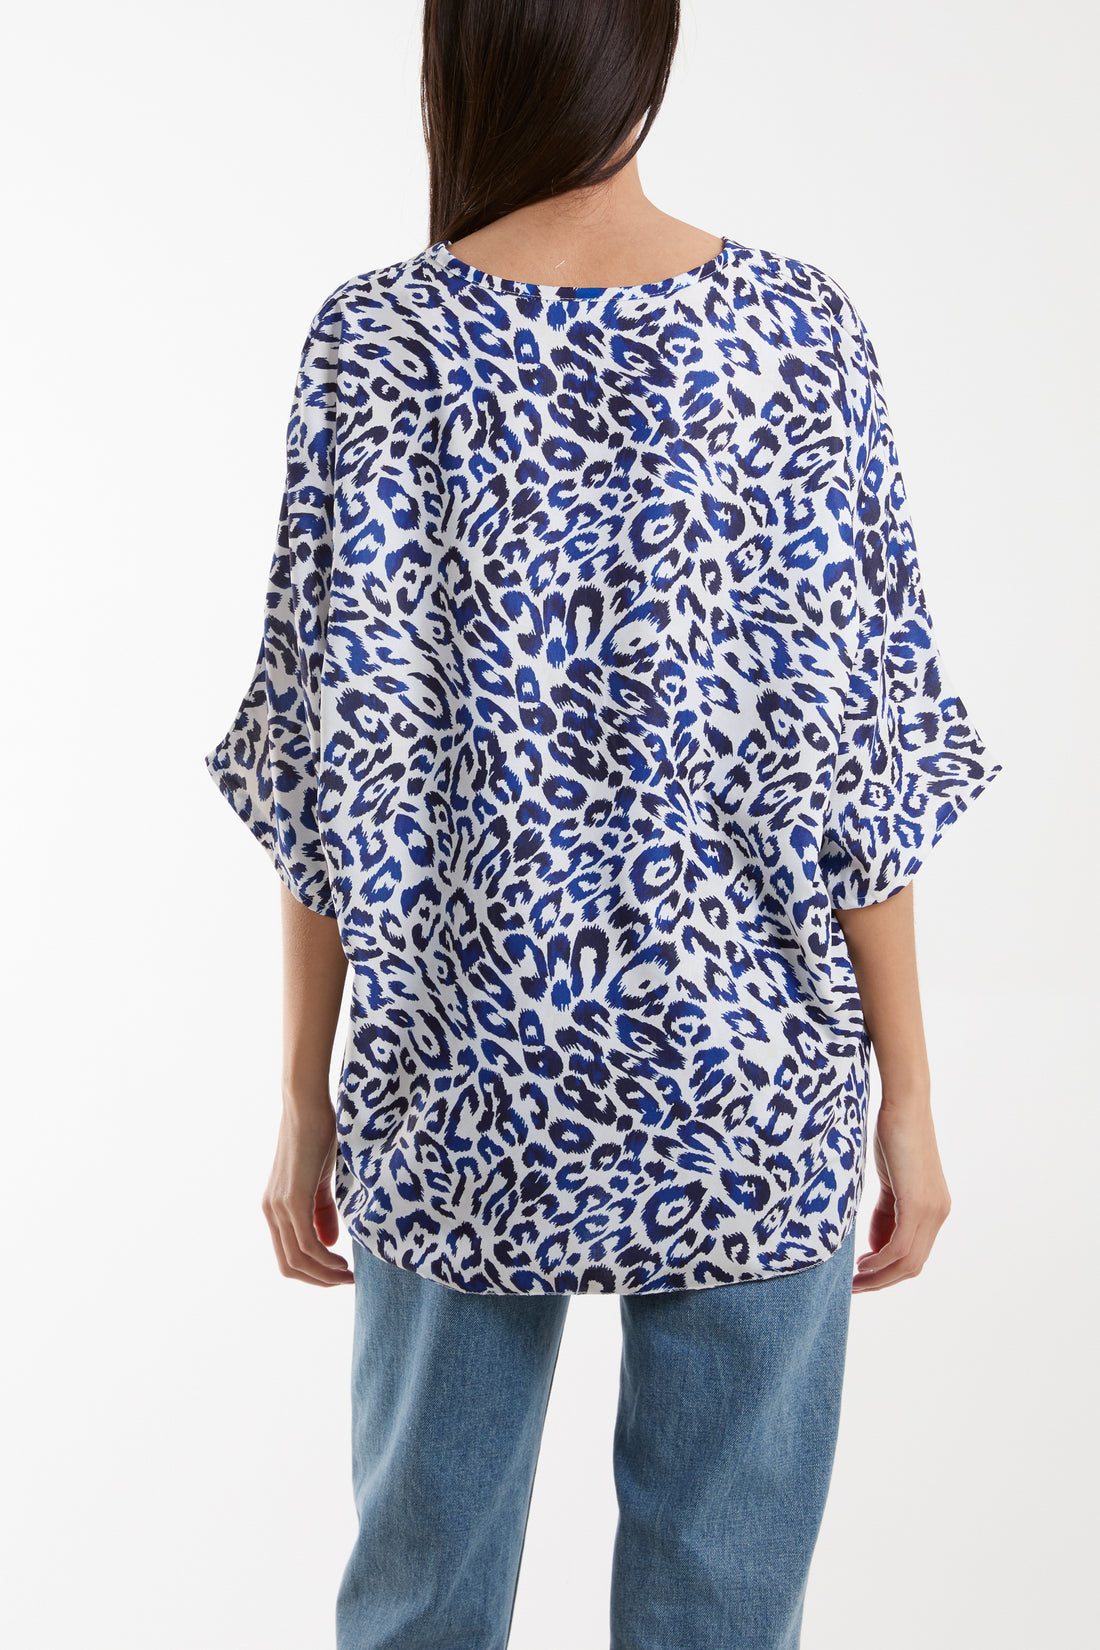 Knot Front Leopard Print Top - Navy